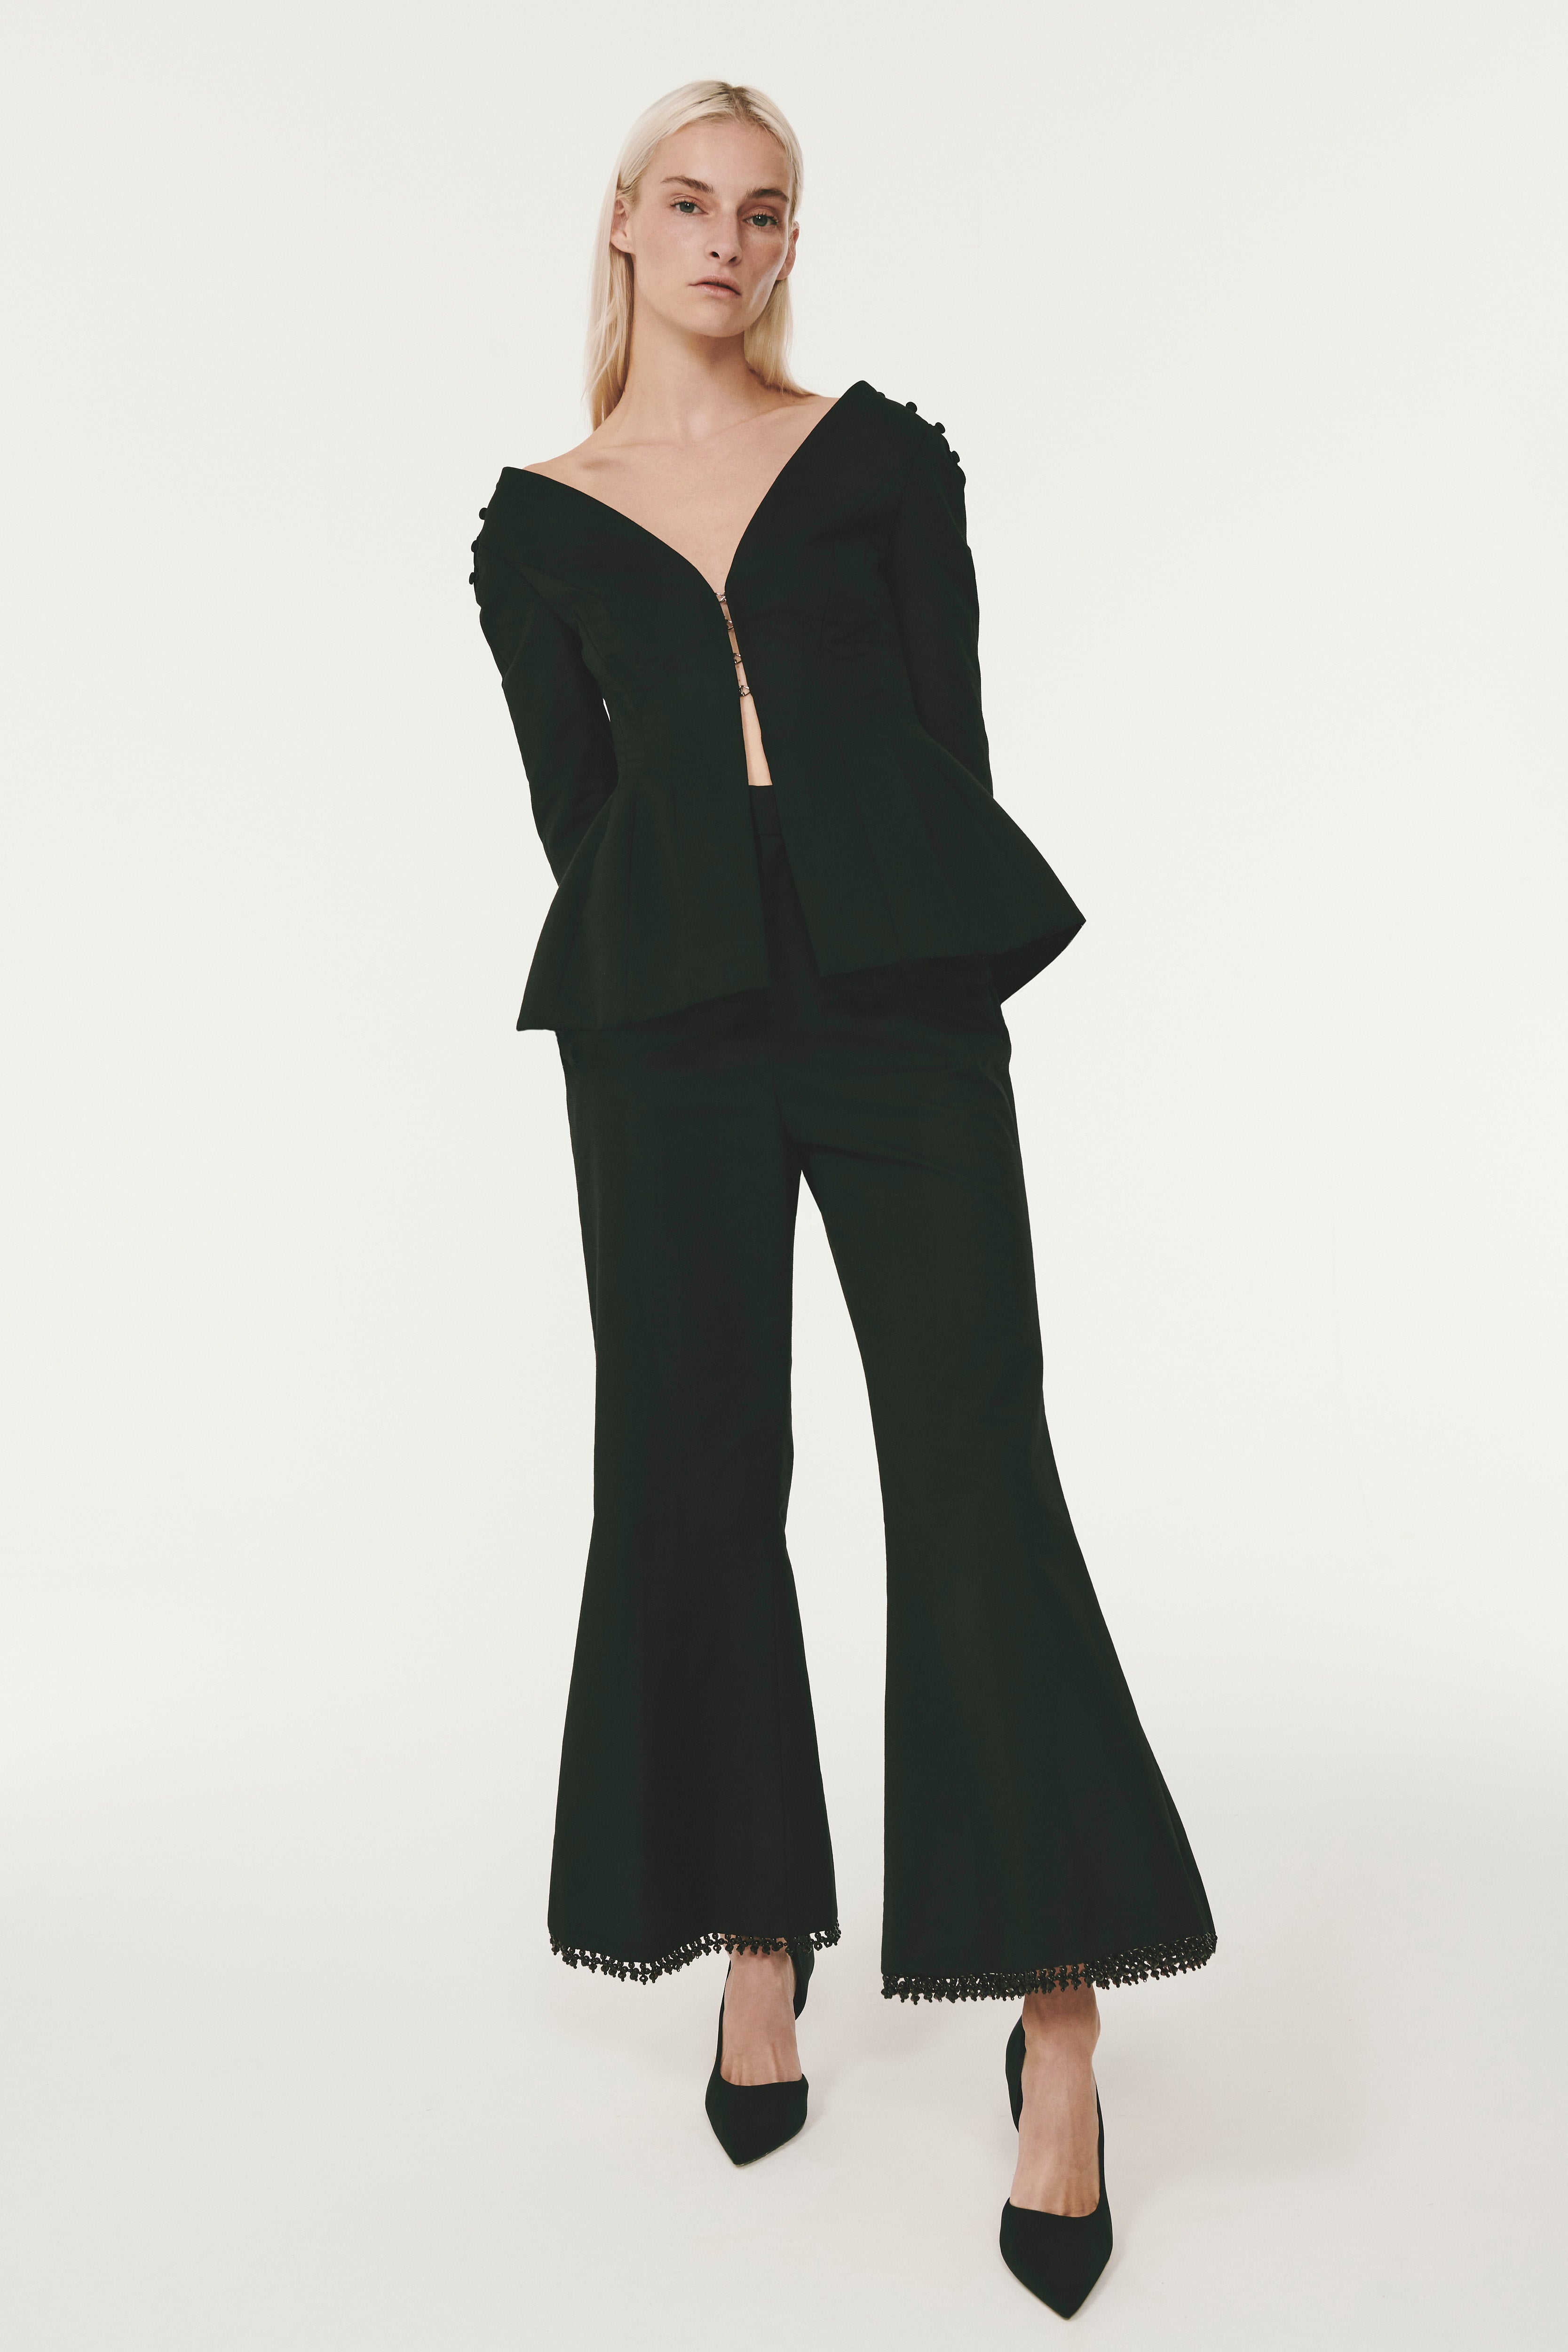 Rosie Assoulin Cut Out Knee Flared Trousers, $1,268